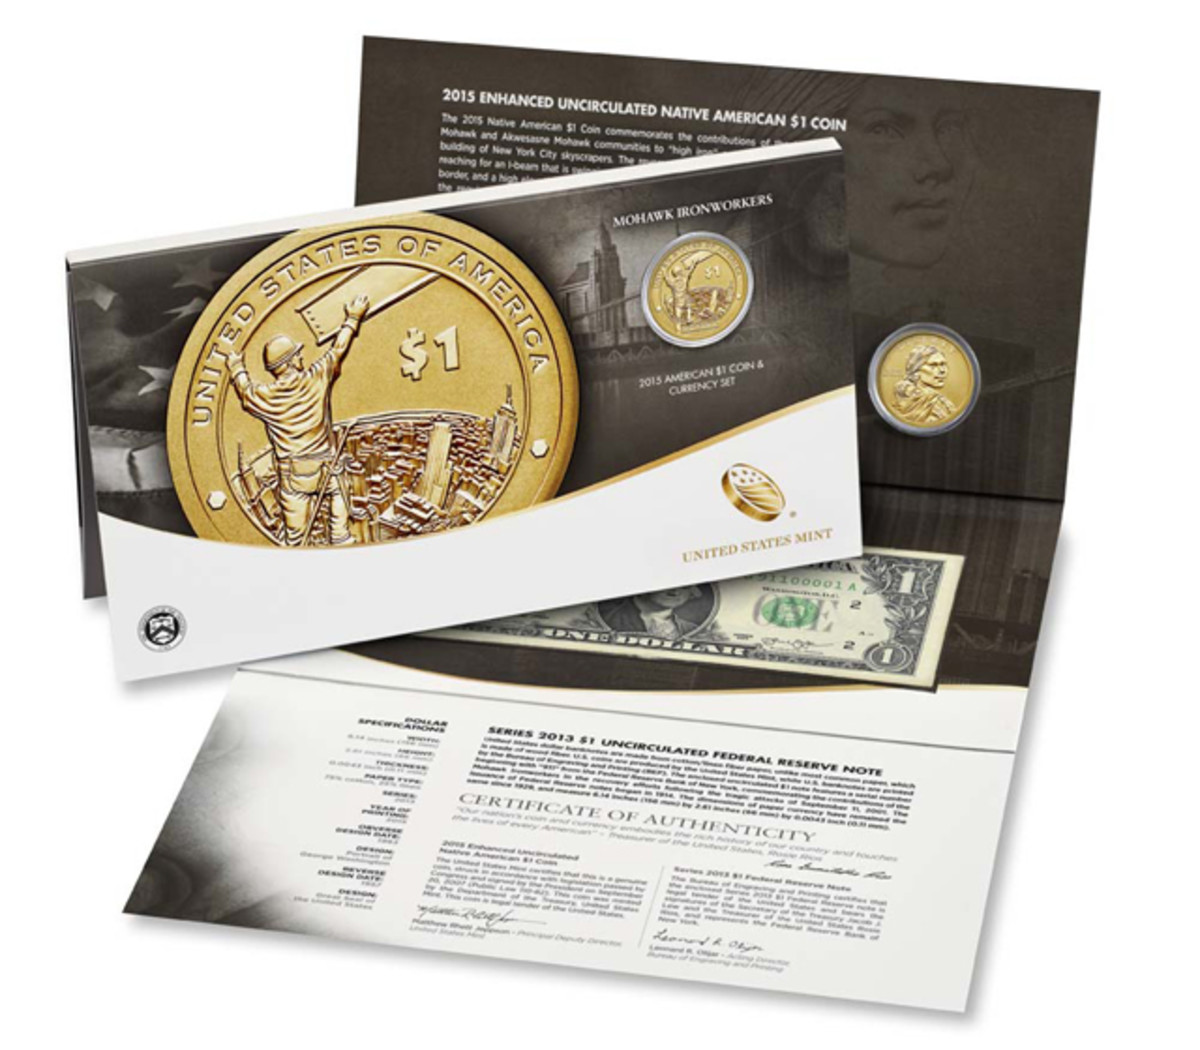 The 2015 American $1 Coin and Currency set is the second set released by the MInt.